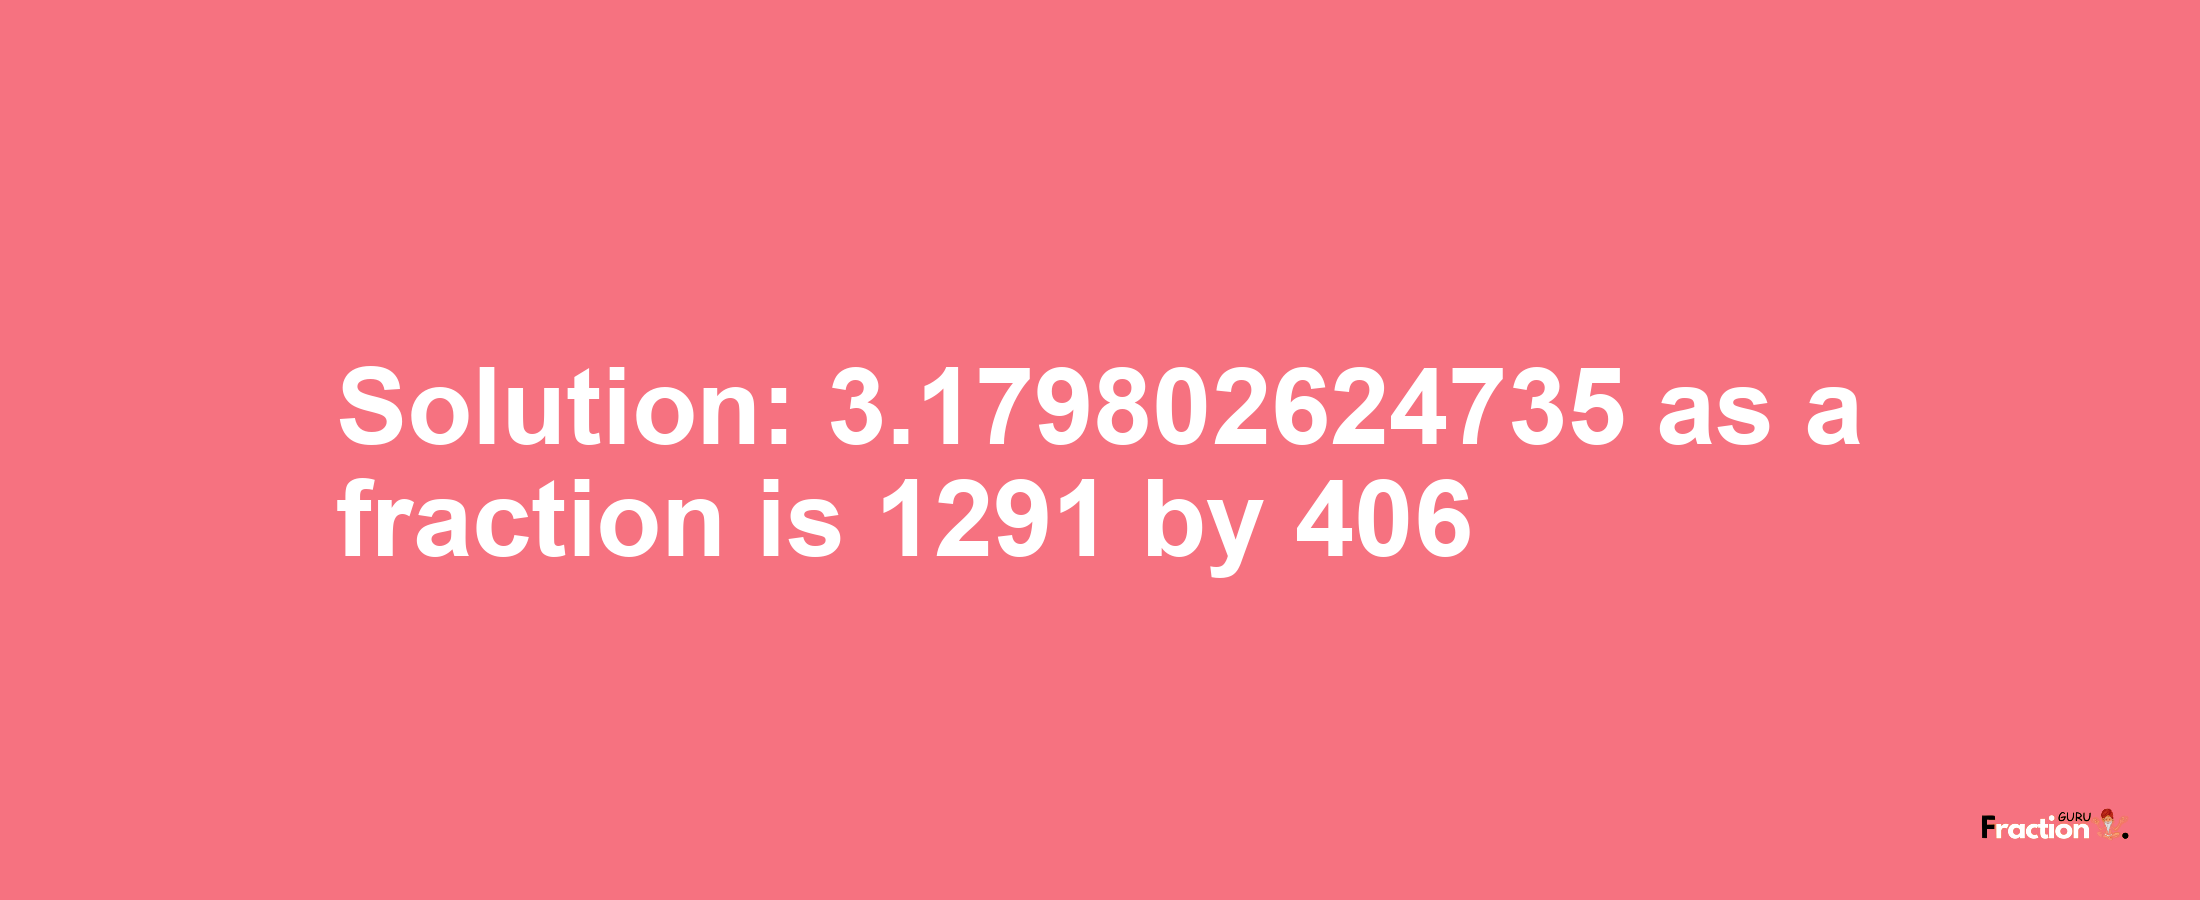 Solution:3.179802624735 as a fraction is 1291/406